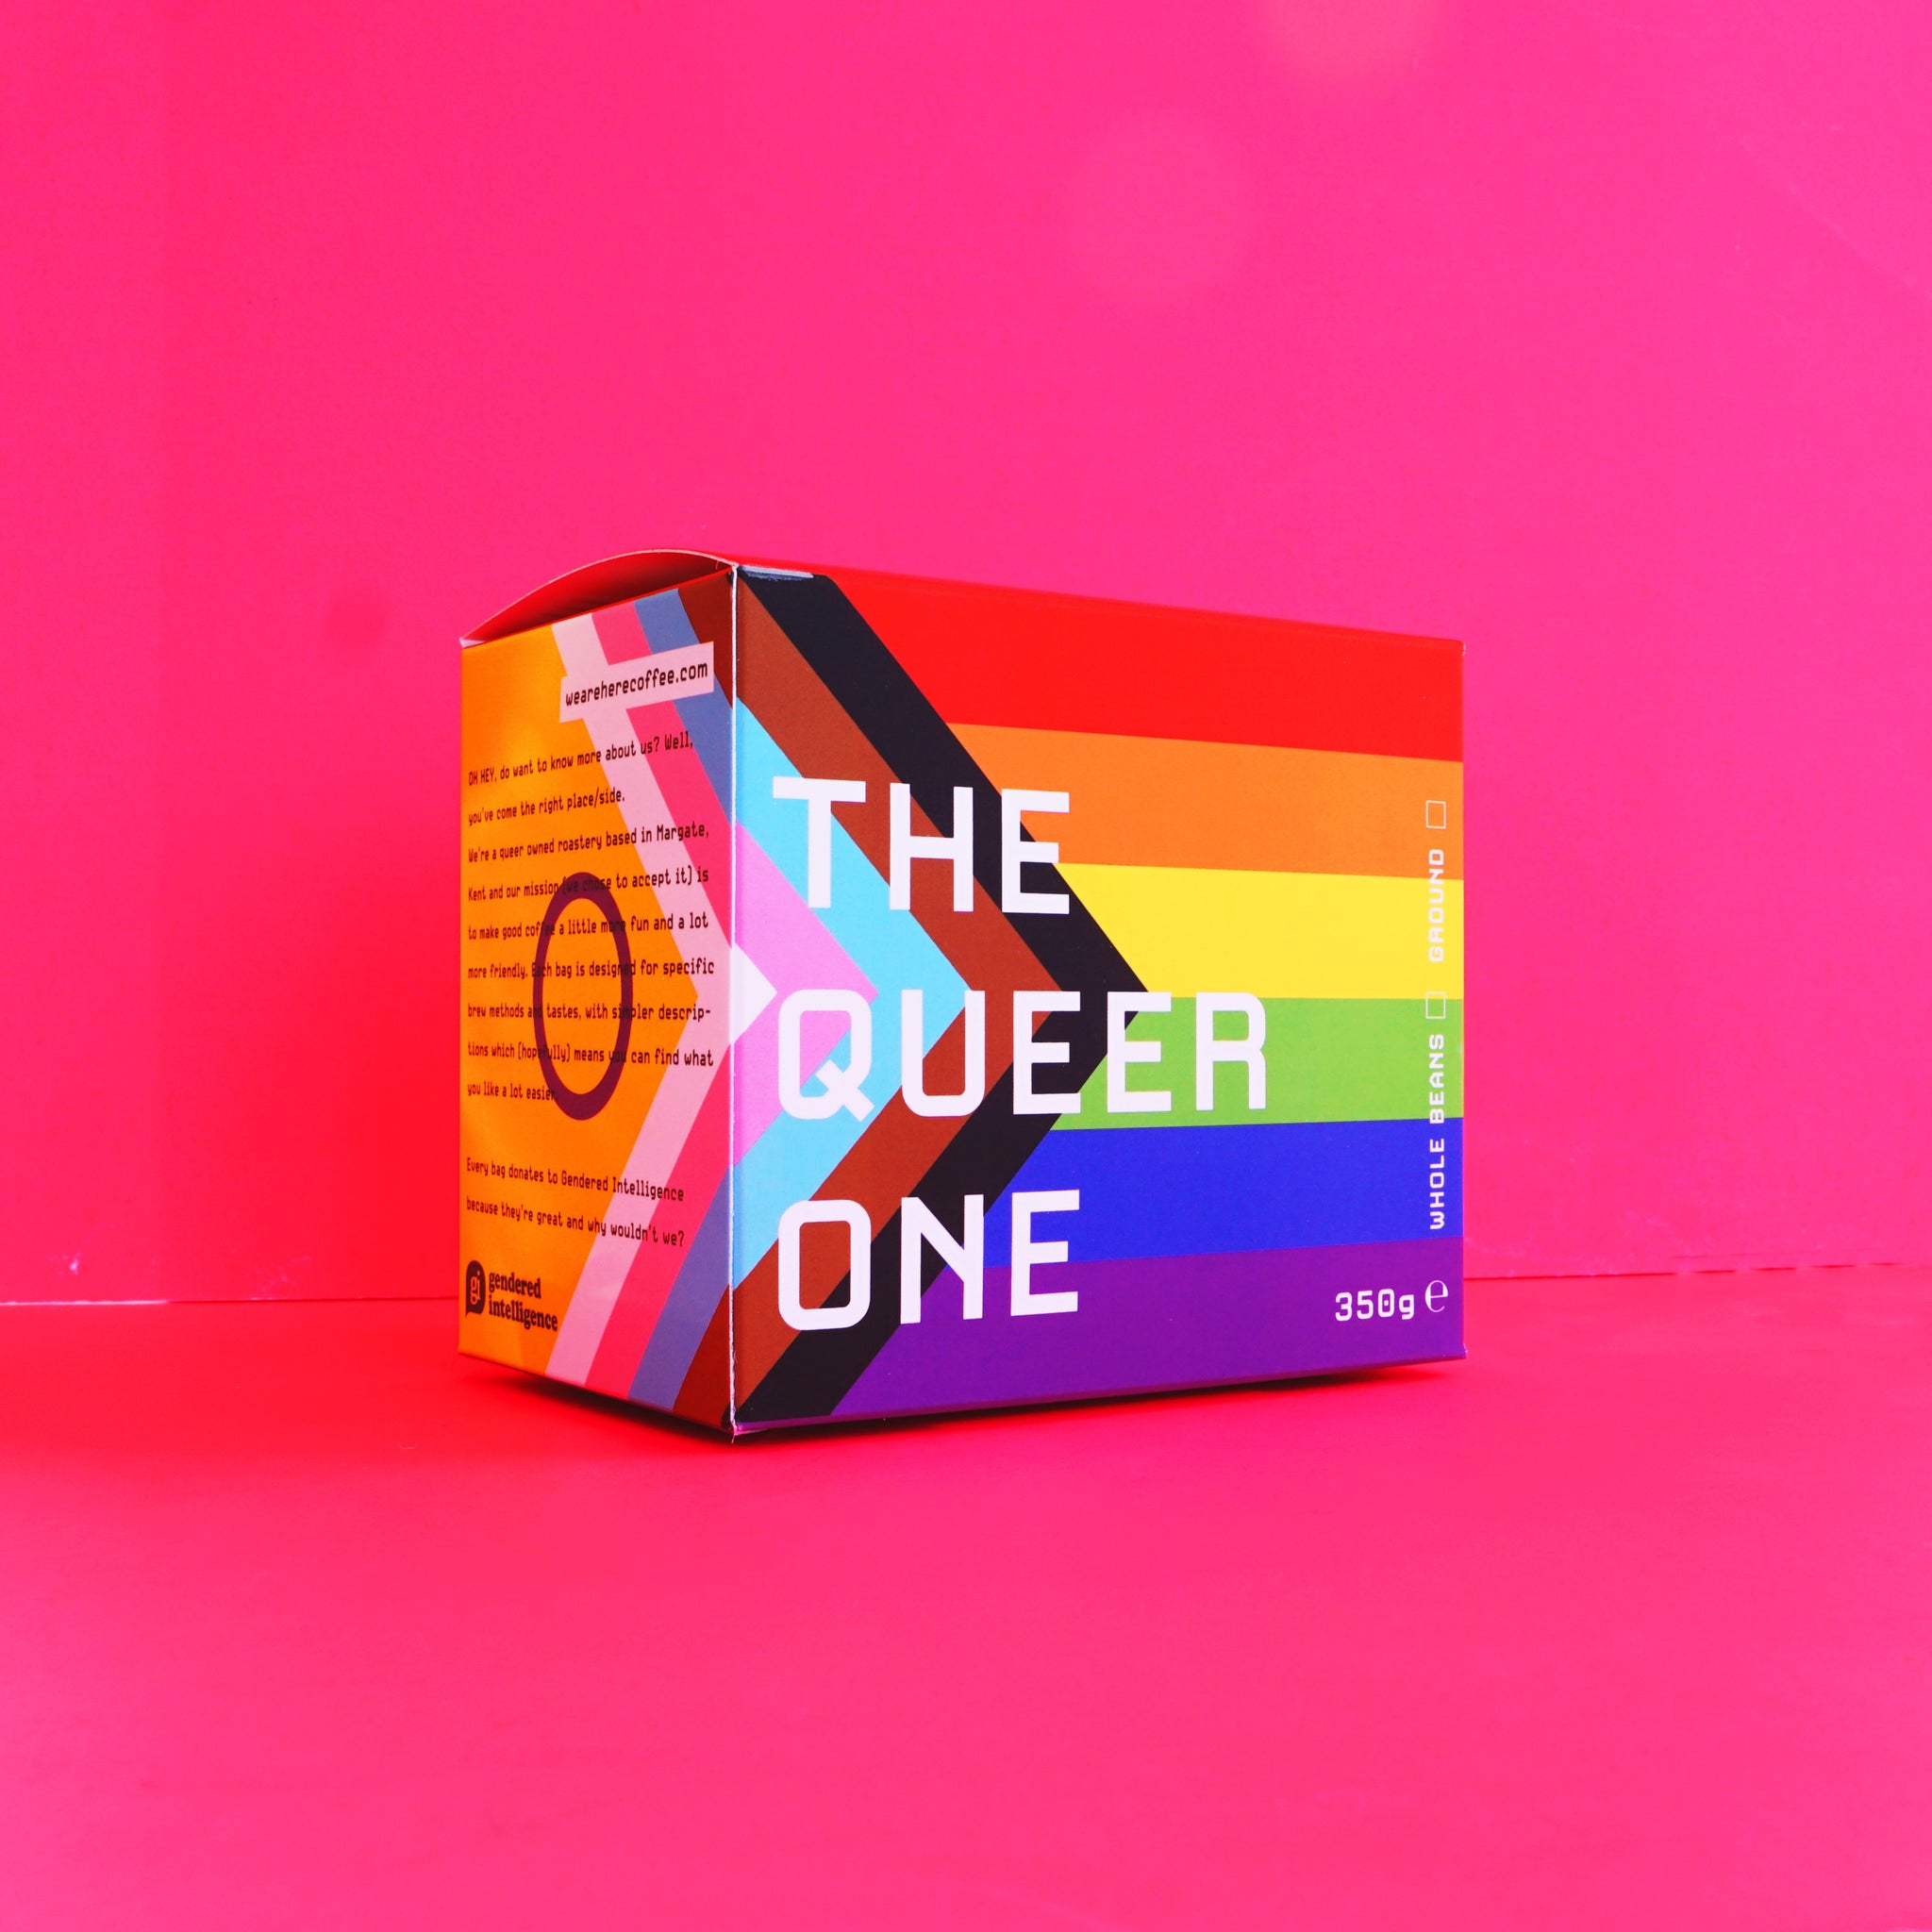 The Queer One - This One